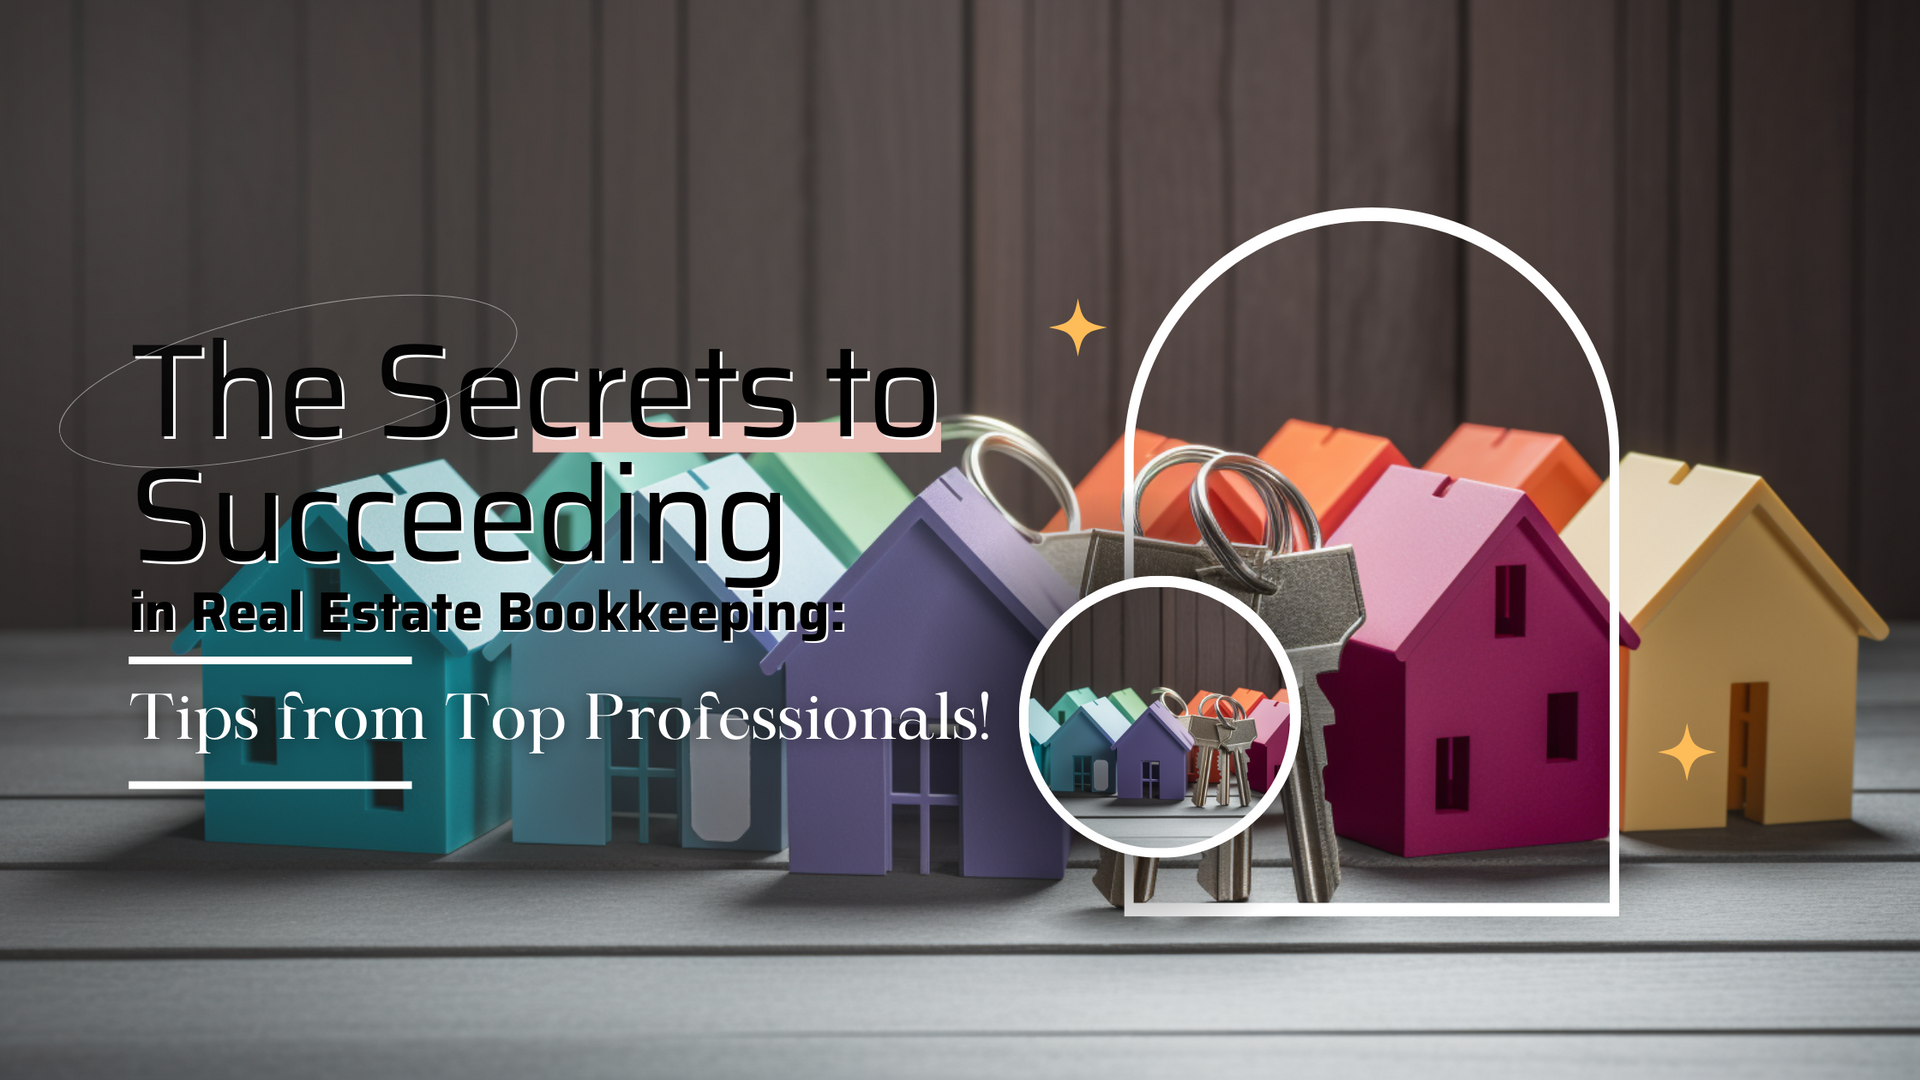 The-Secrets-to-Succeeding-in-Real-Estate-Bookkeeping-Tips-from-Top-Professionals!